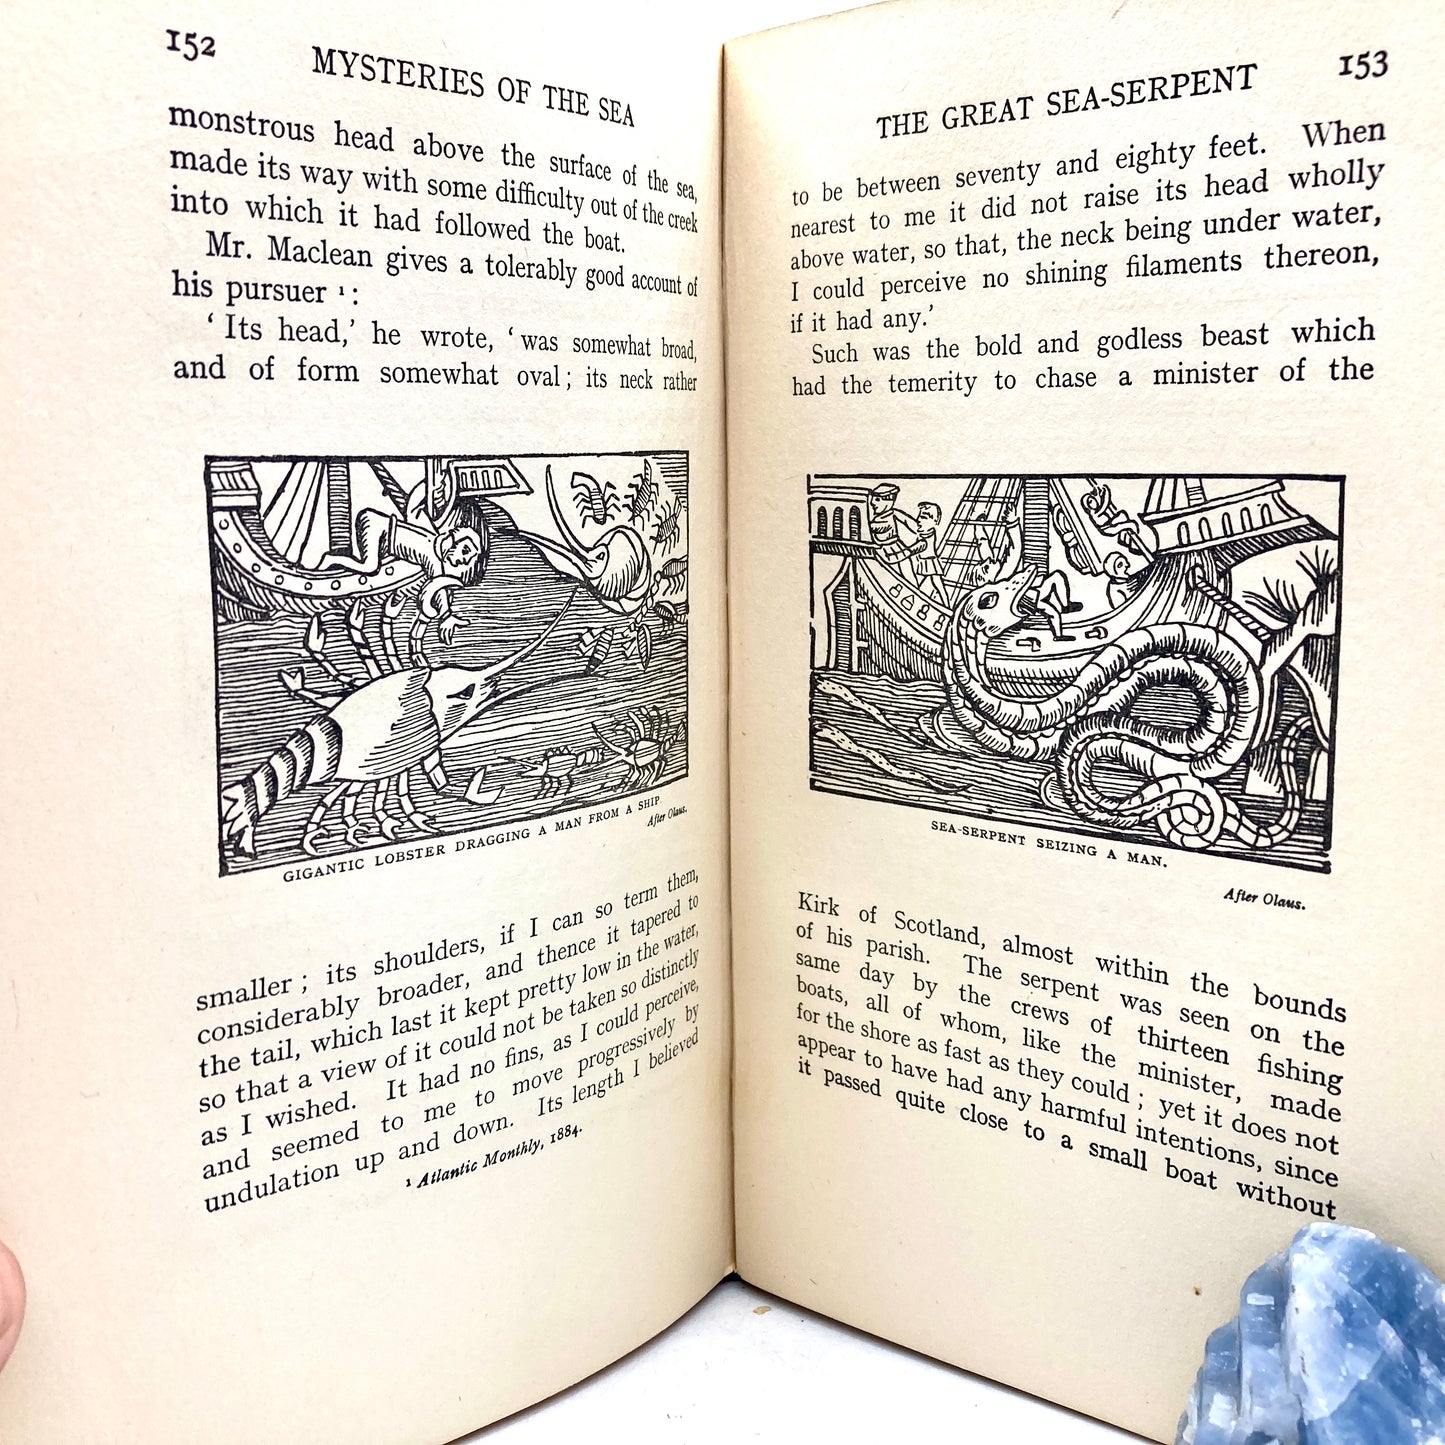 LOCKHART, J.G. "Mysteries of the Sea" [Philip Allan & Co, 1925] 2nd Edition